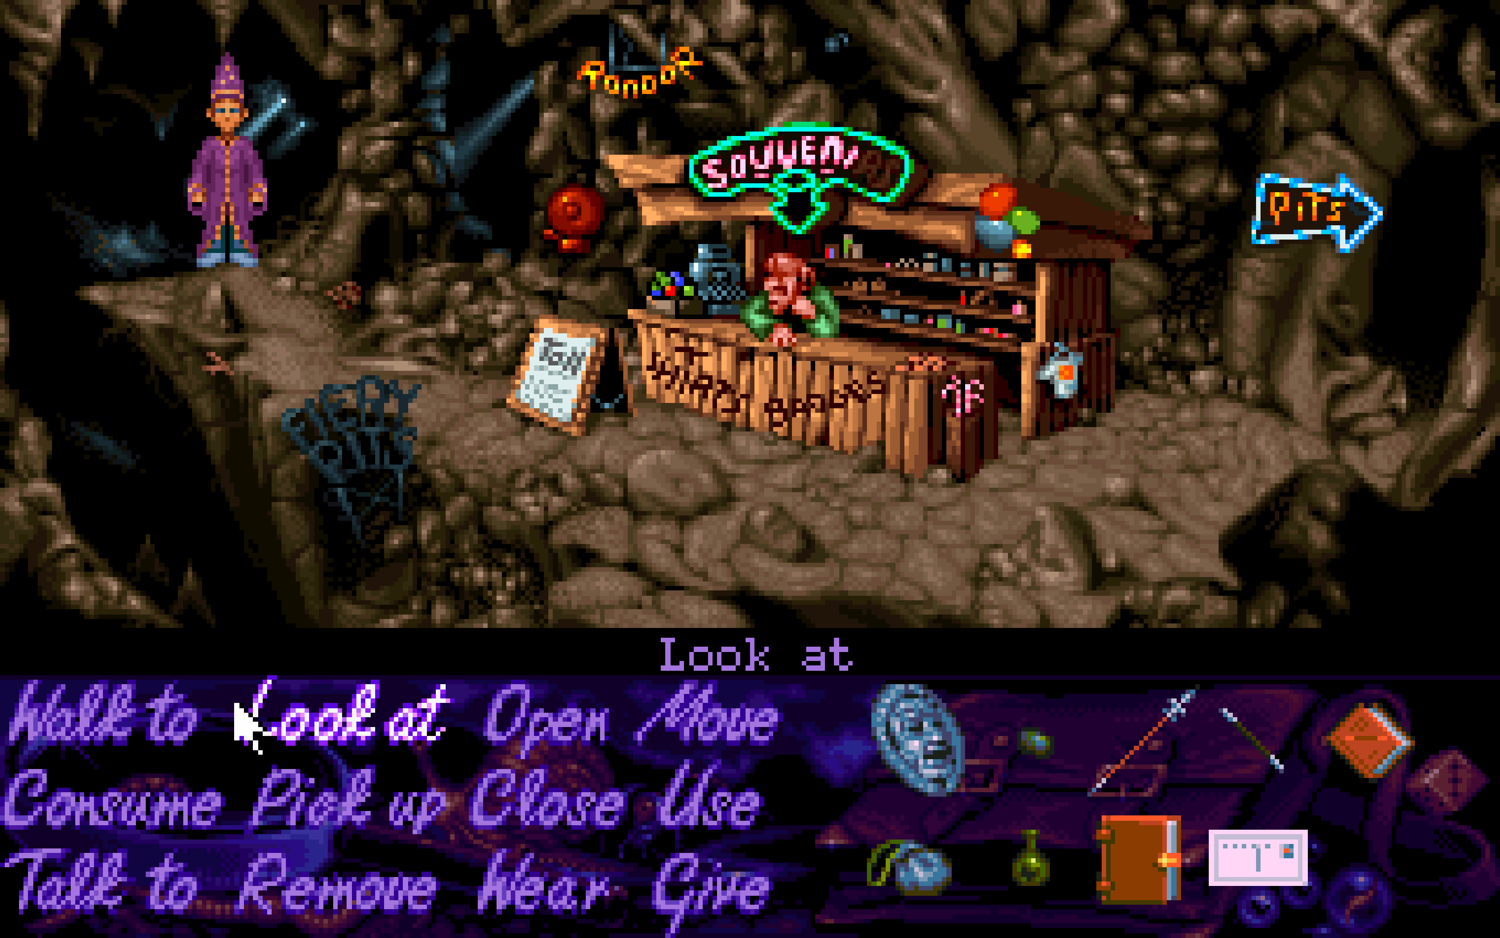 A screenshot of Simon the Sorcerer where Simon has landed in Sordid's dungeon, where there's a souvenir stand.